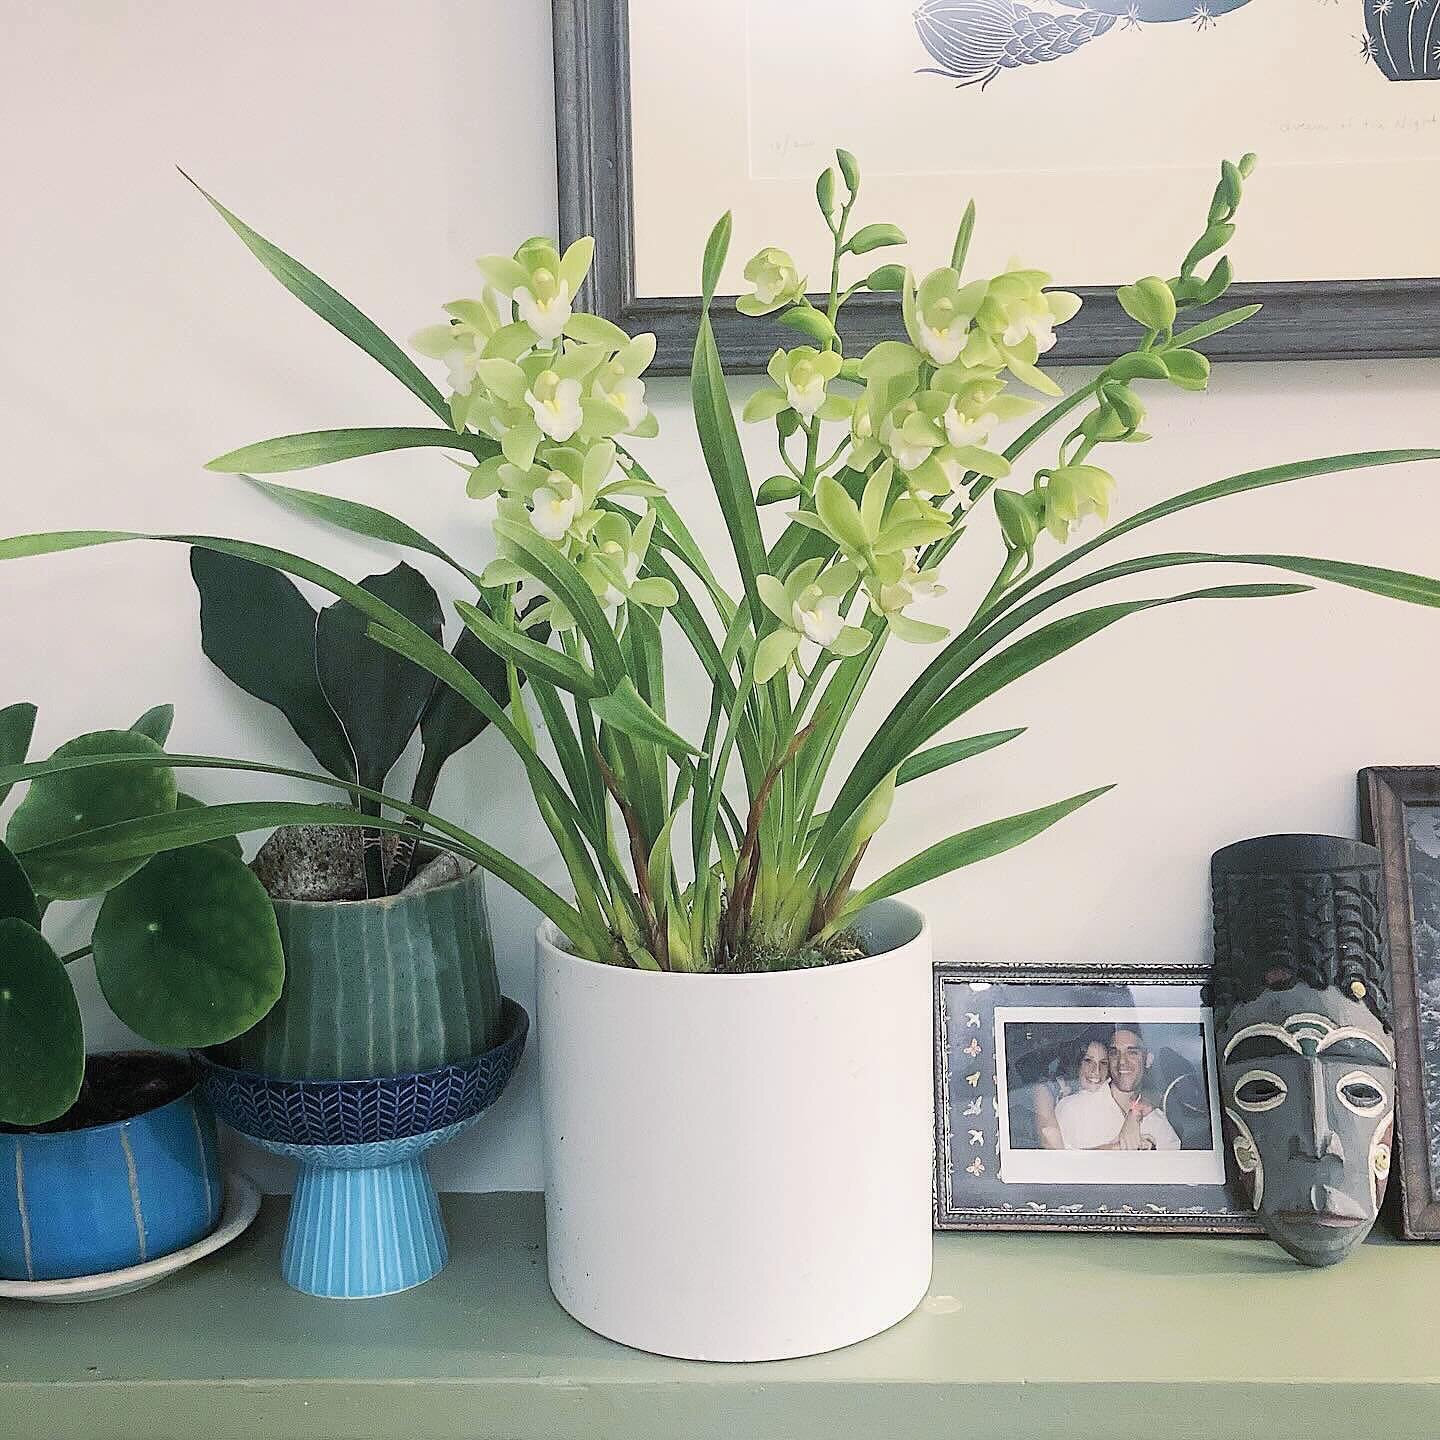 I don&rsquo;t post many houseplant pics, but I am a sucker for a green flower. I&rsquo;ve been hunting a green #cymbidium for years now and finally got my hands on this one. #homedepotcomeup Once it blooms out it&rsquo;ll be a wonderful addition to o